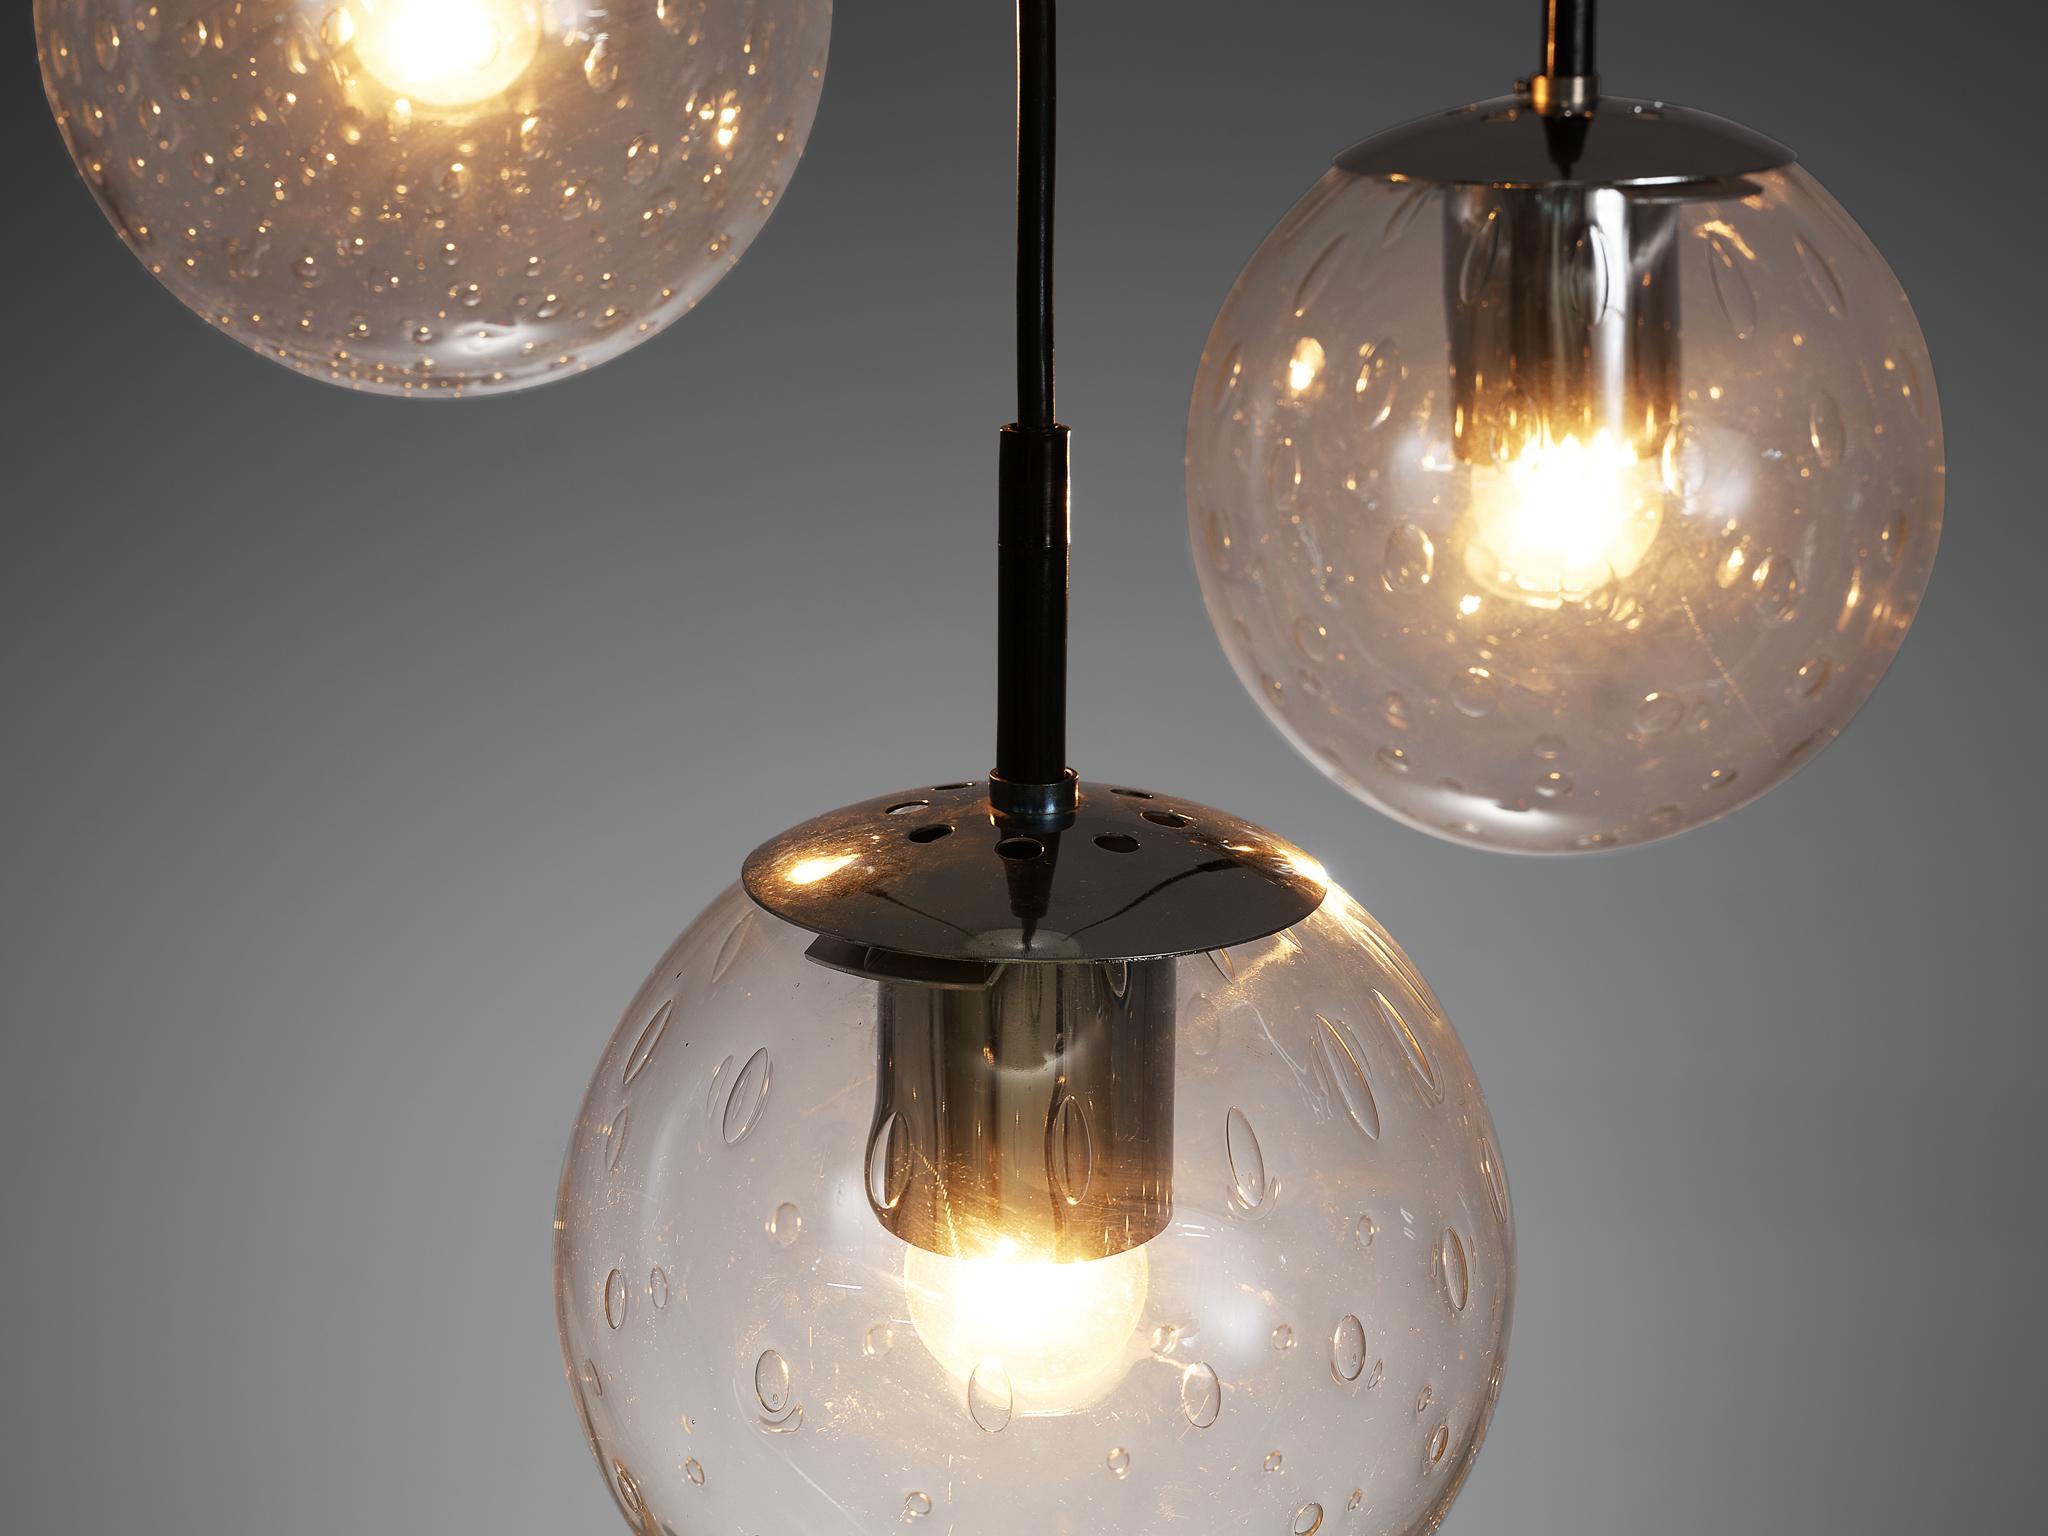 Chrome RAAK Chandelier with Spheres in Hand-Blown Glass 